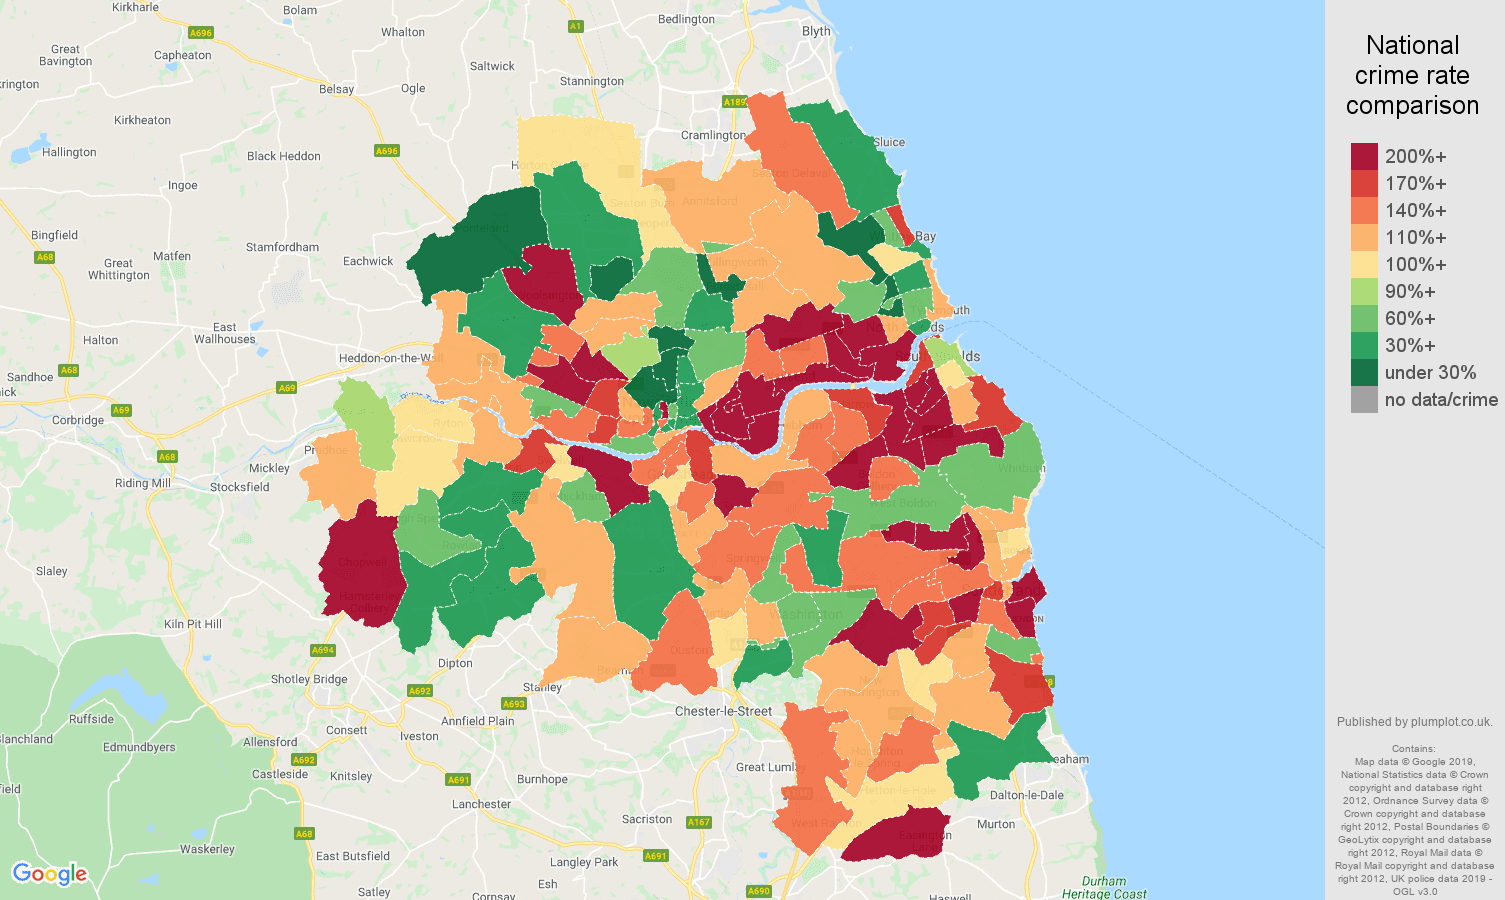 Tyne and Wear other crime rate comparison map